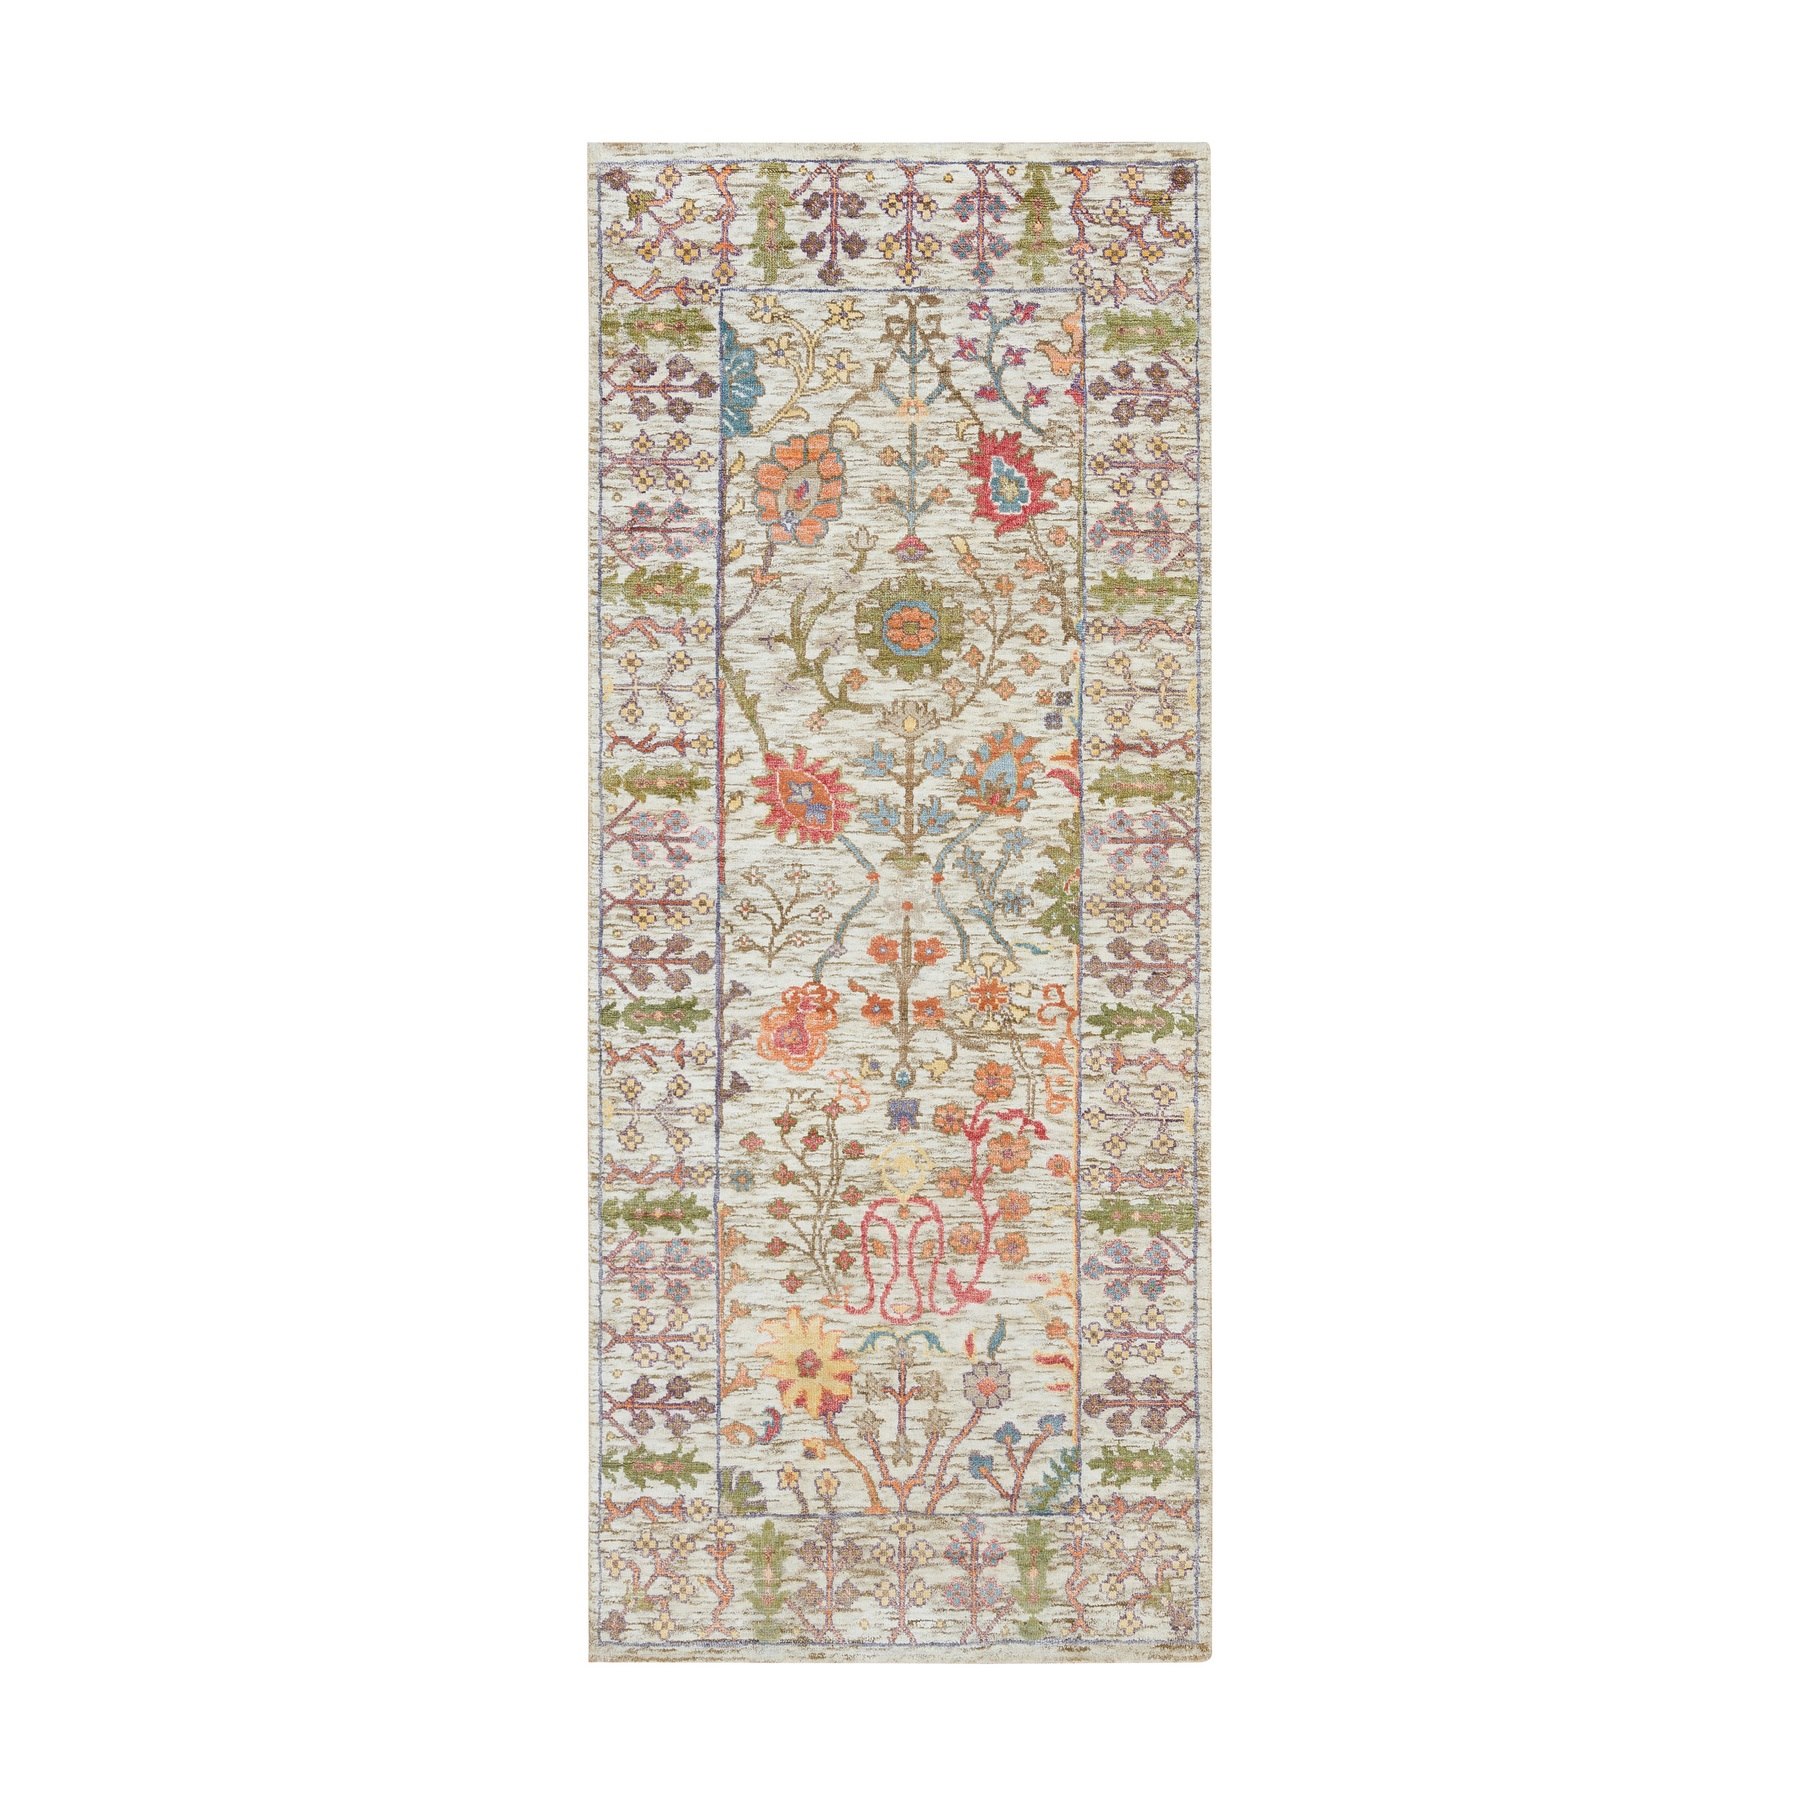 Wool and Silk Rugs LUV593235